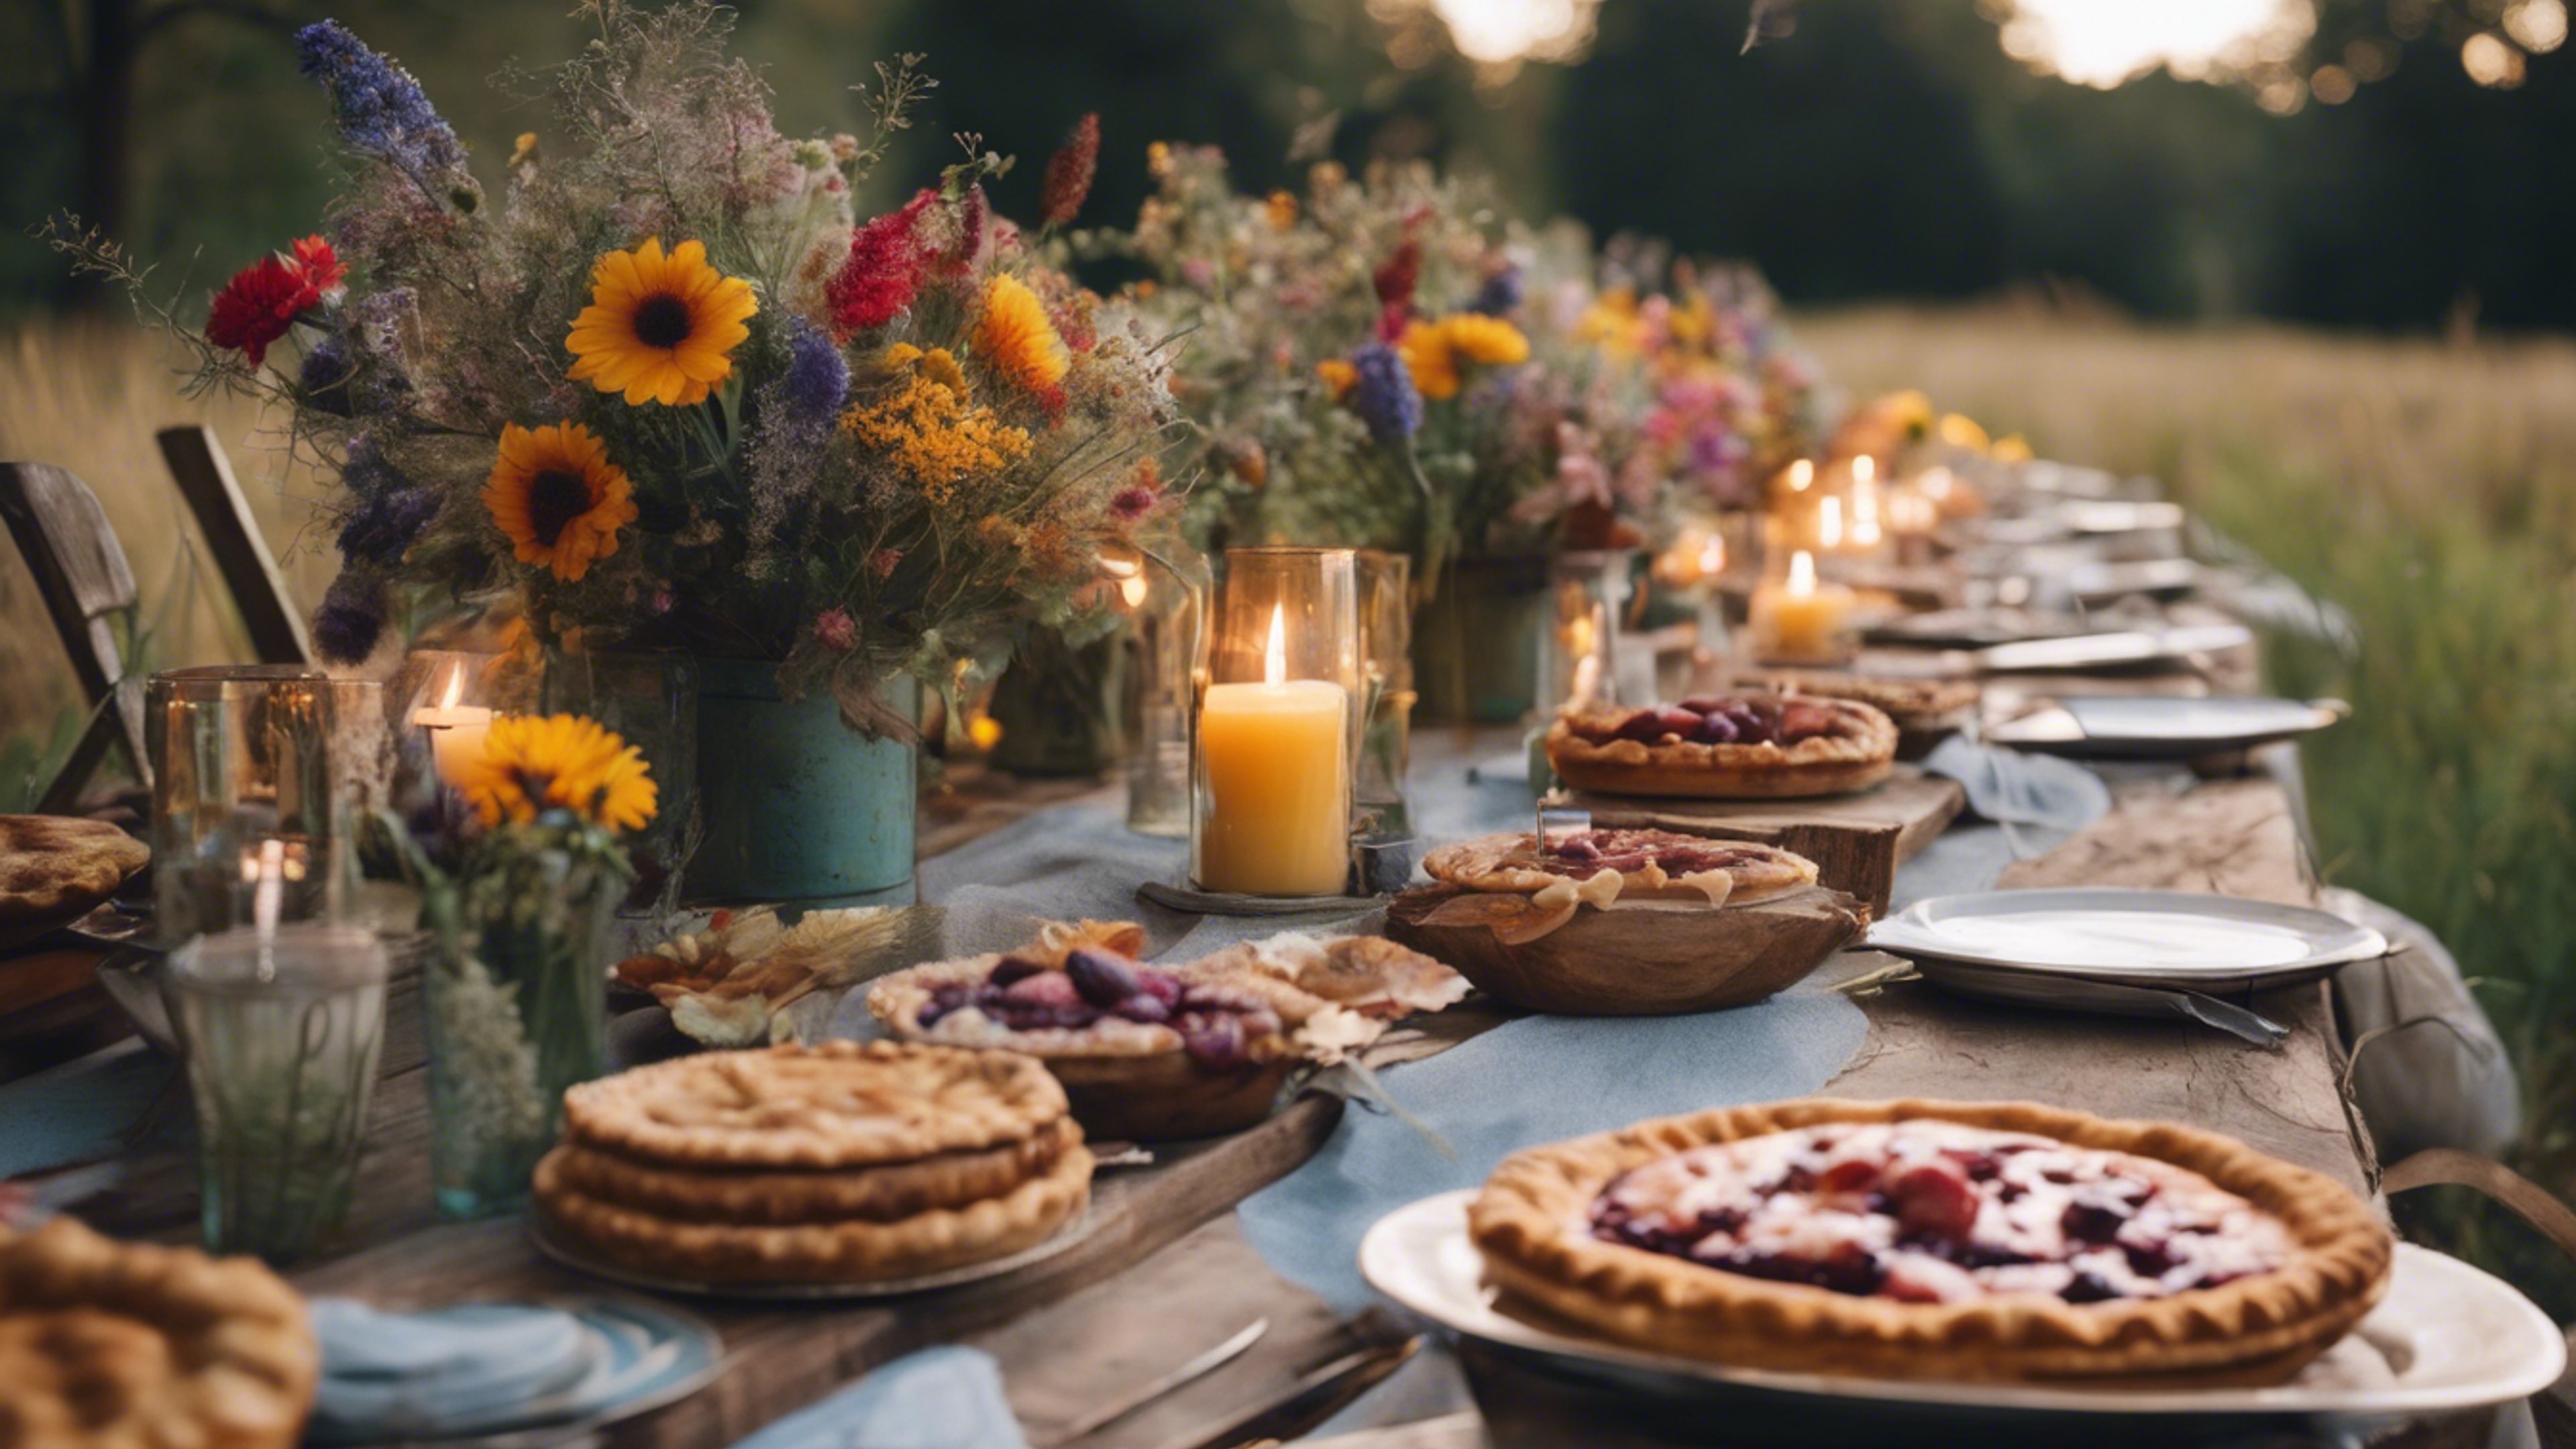 A rustic outdoor gathering; wooden tables covered with candles, homemade pies, and colourful wildflowers.壁紙[b624c356f7d649fa8c66]